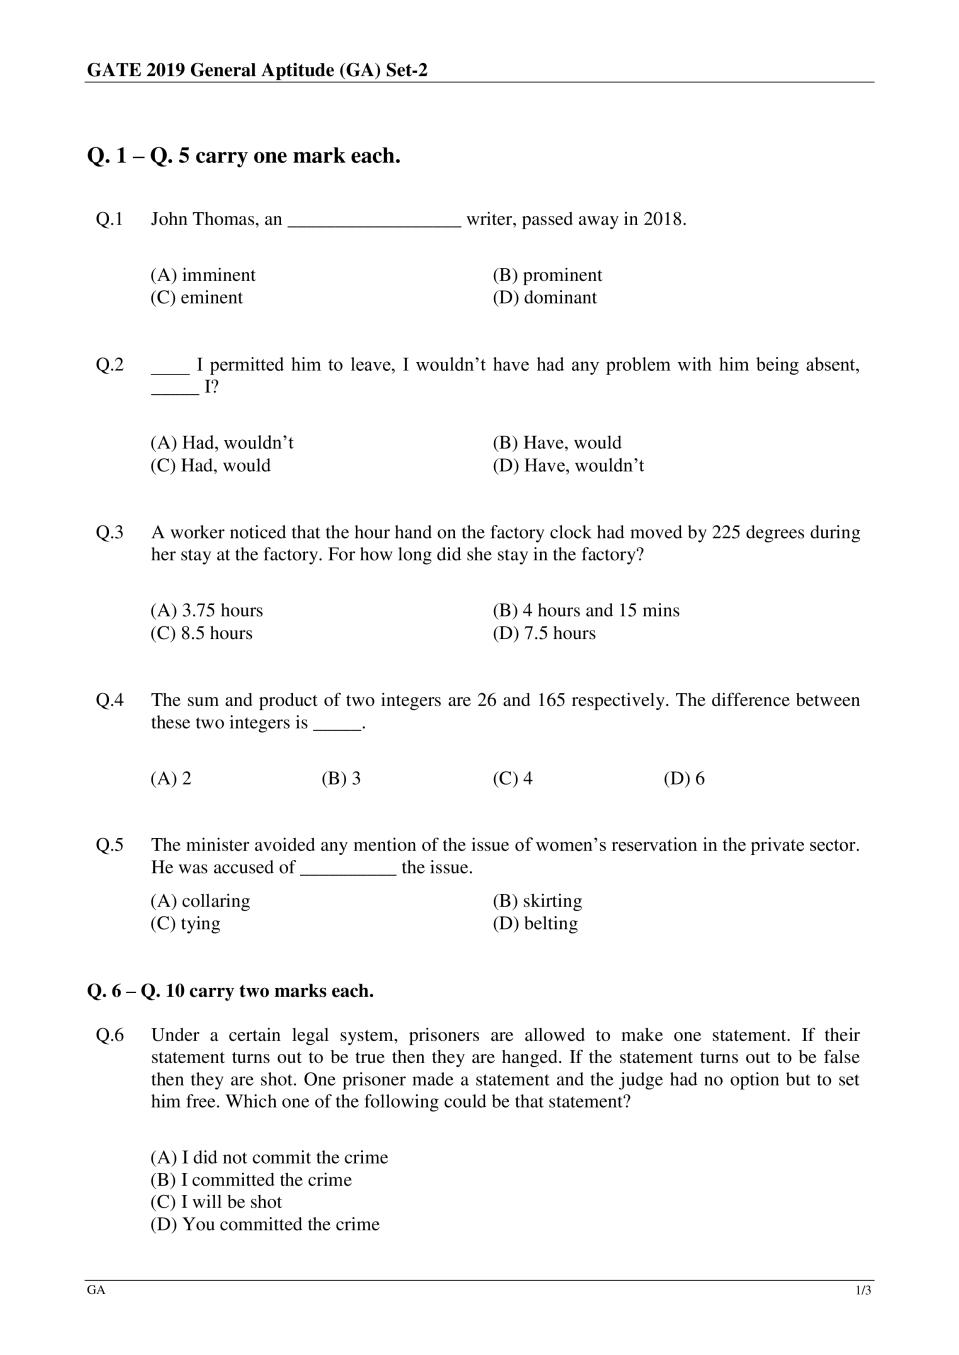 GATE 2019 Mining Engineering Question Paper with Answer - Page 1